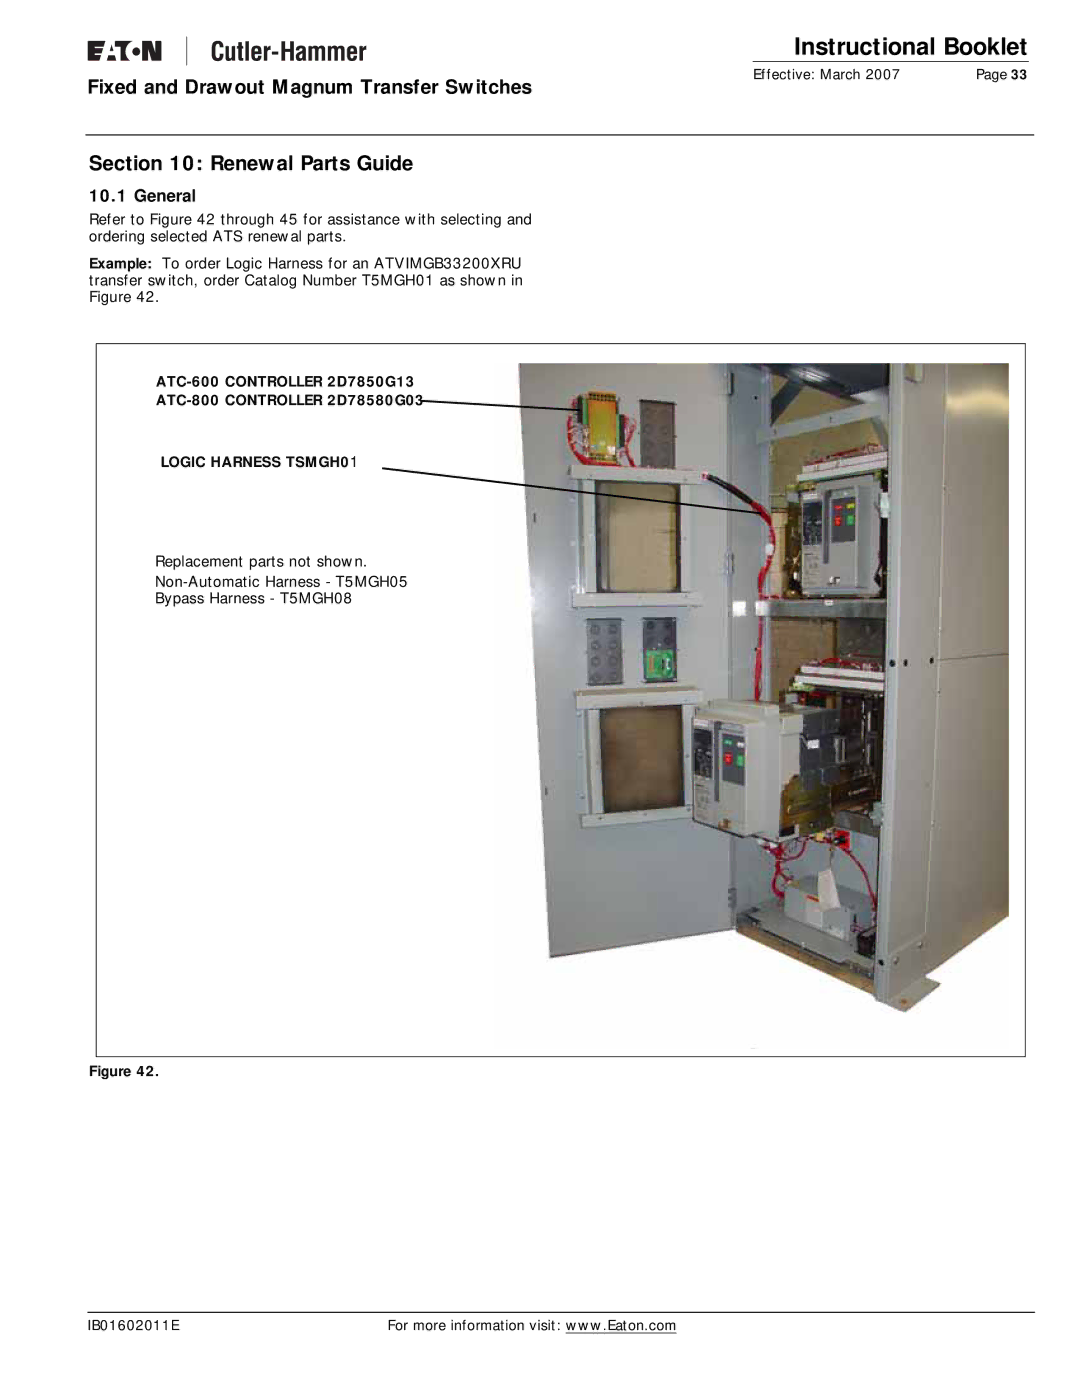 Eaton Electrical Magnum Transfer Switch manual Renewal Parts Guide, General 